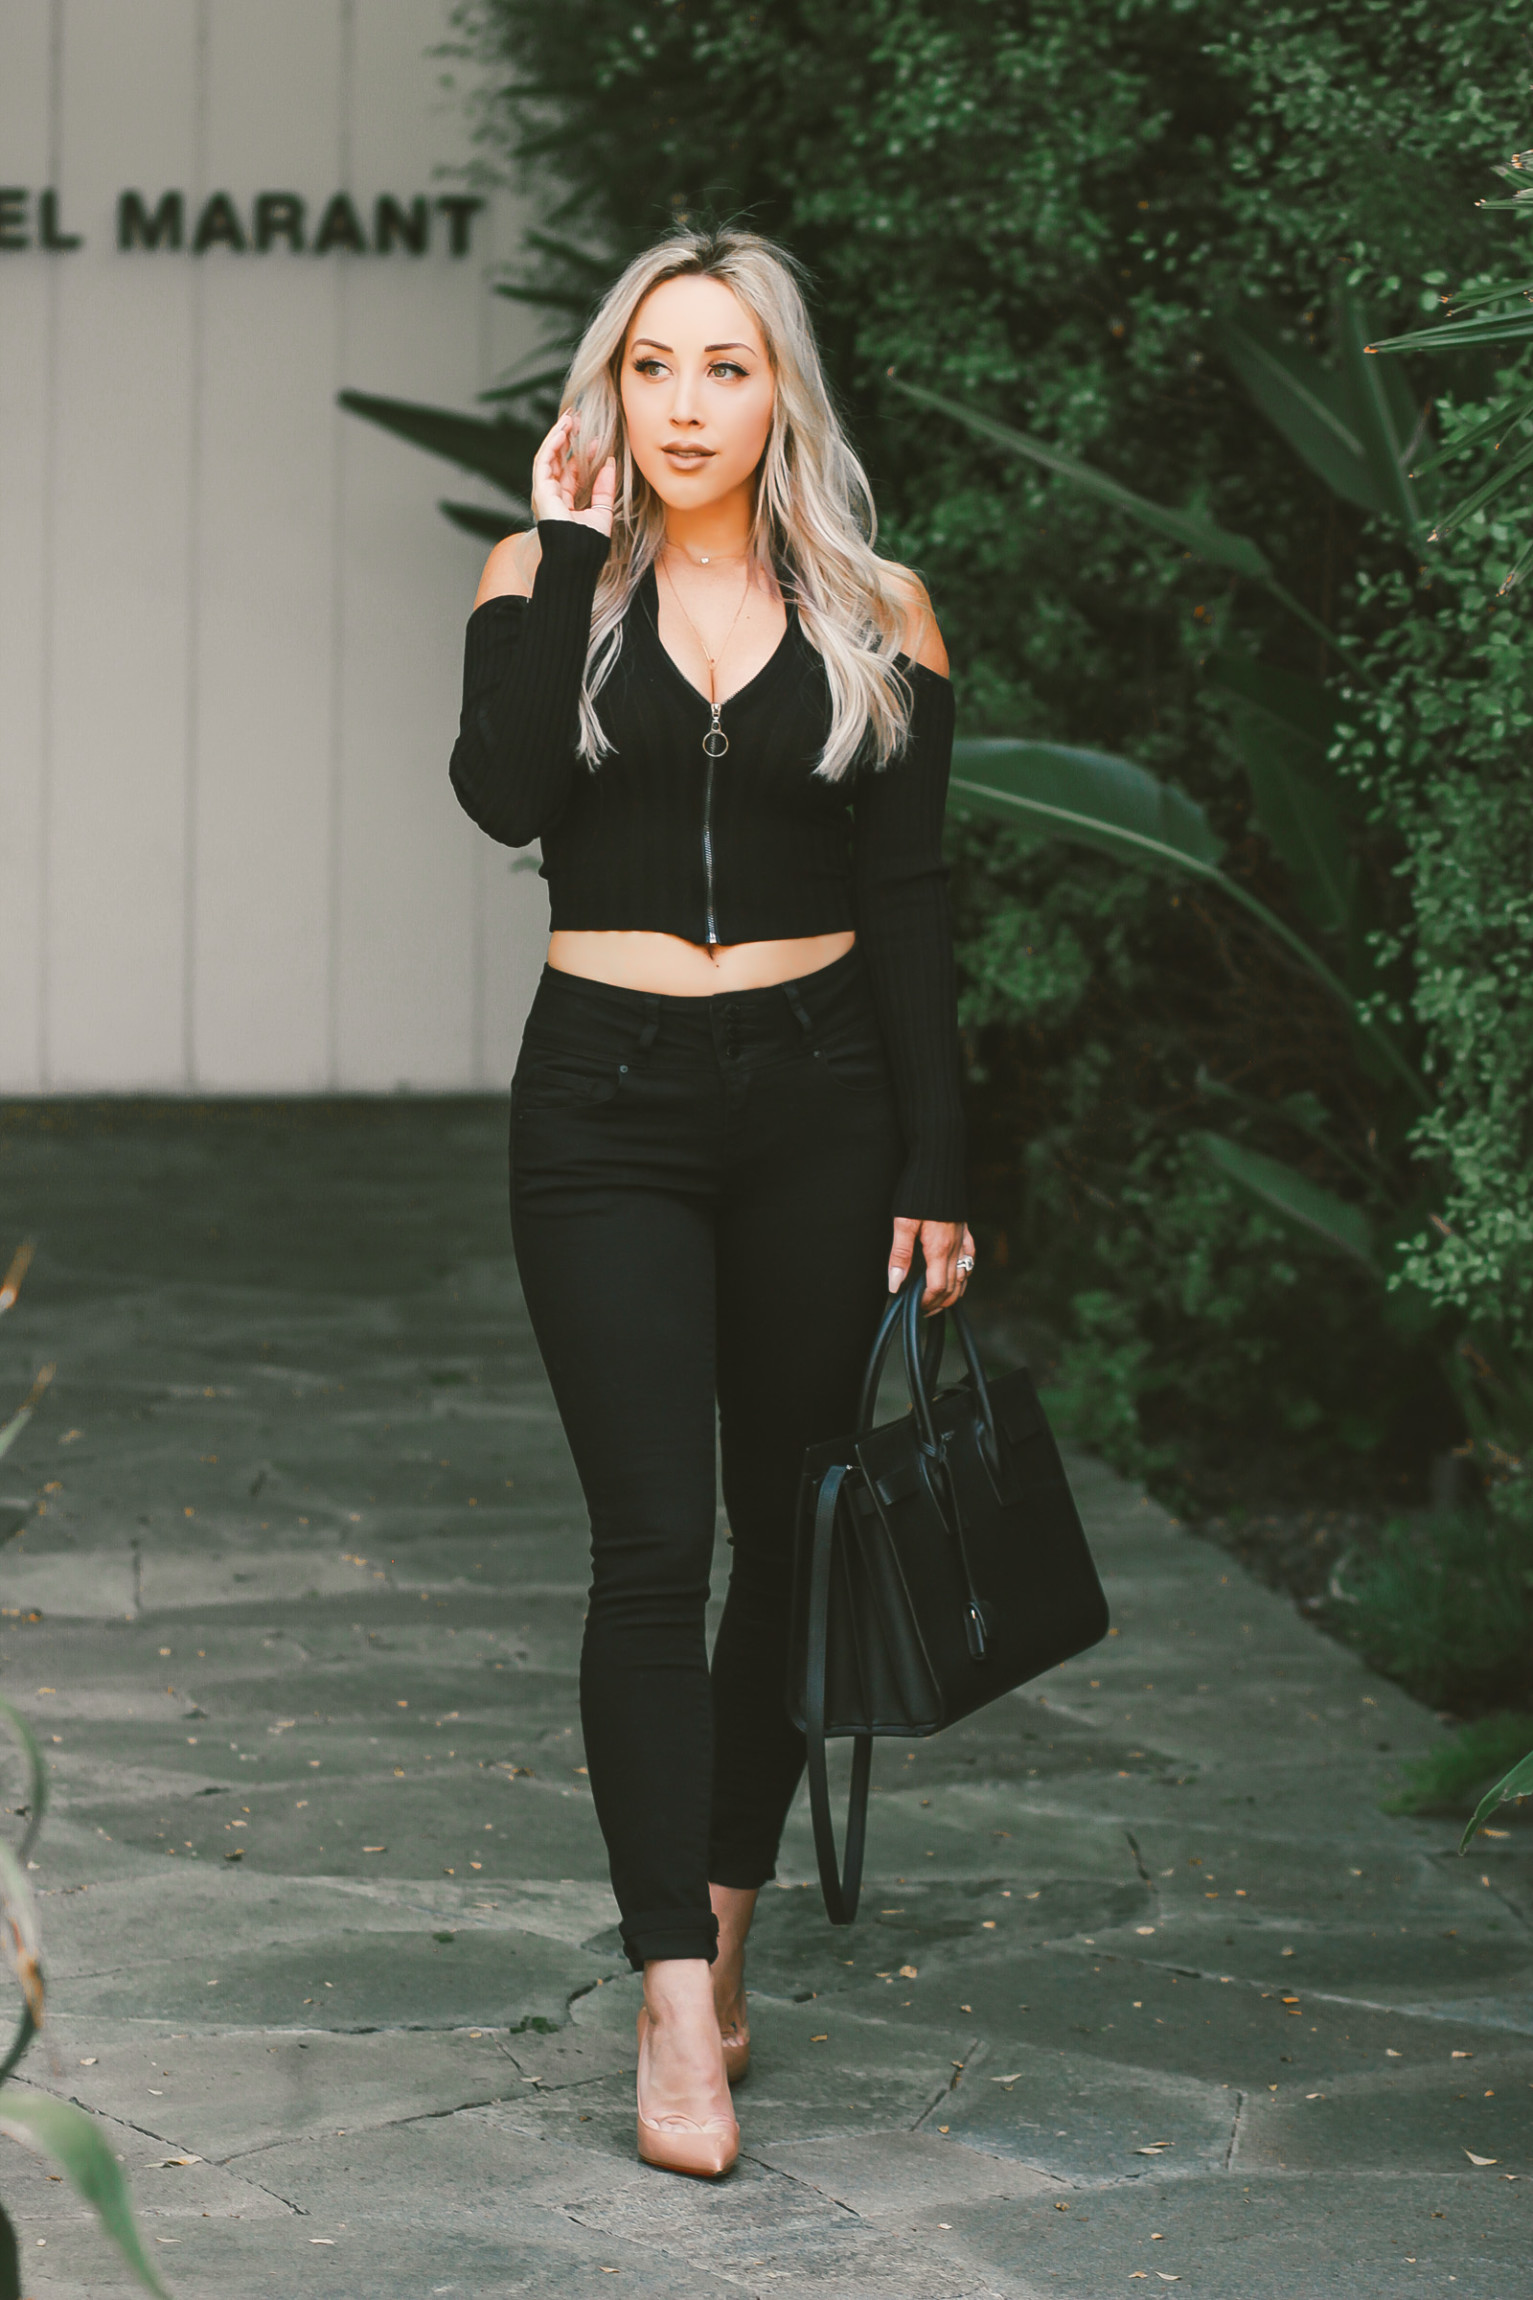 Butt Shaping Jeans | All Black Attire | Black Saint Laurent | Blondie in the City by Hayley Larue